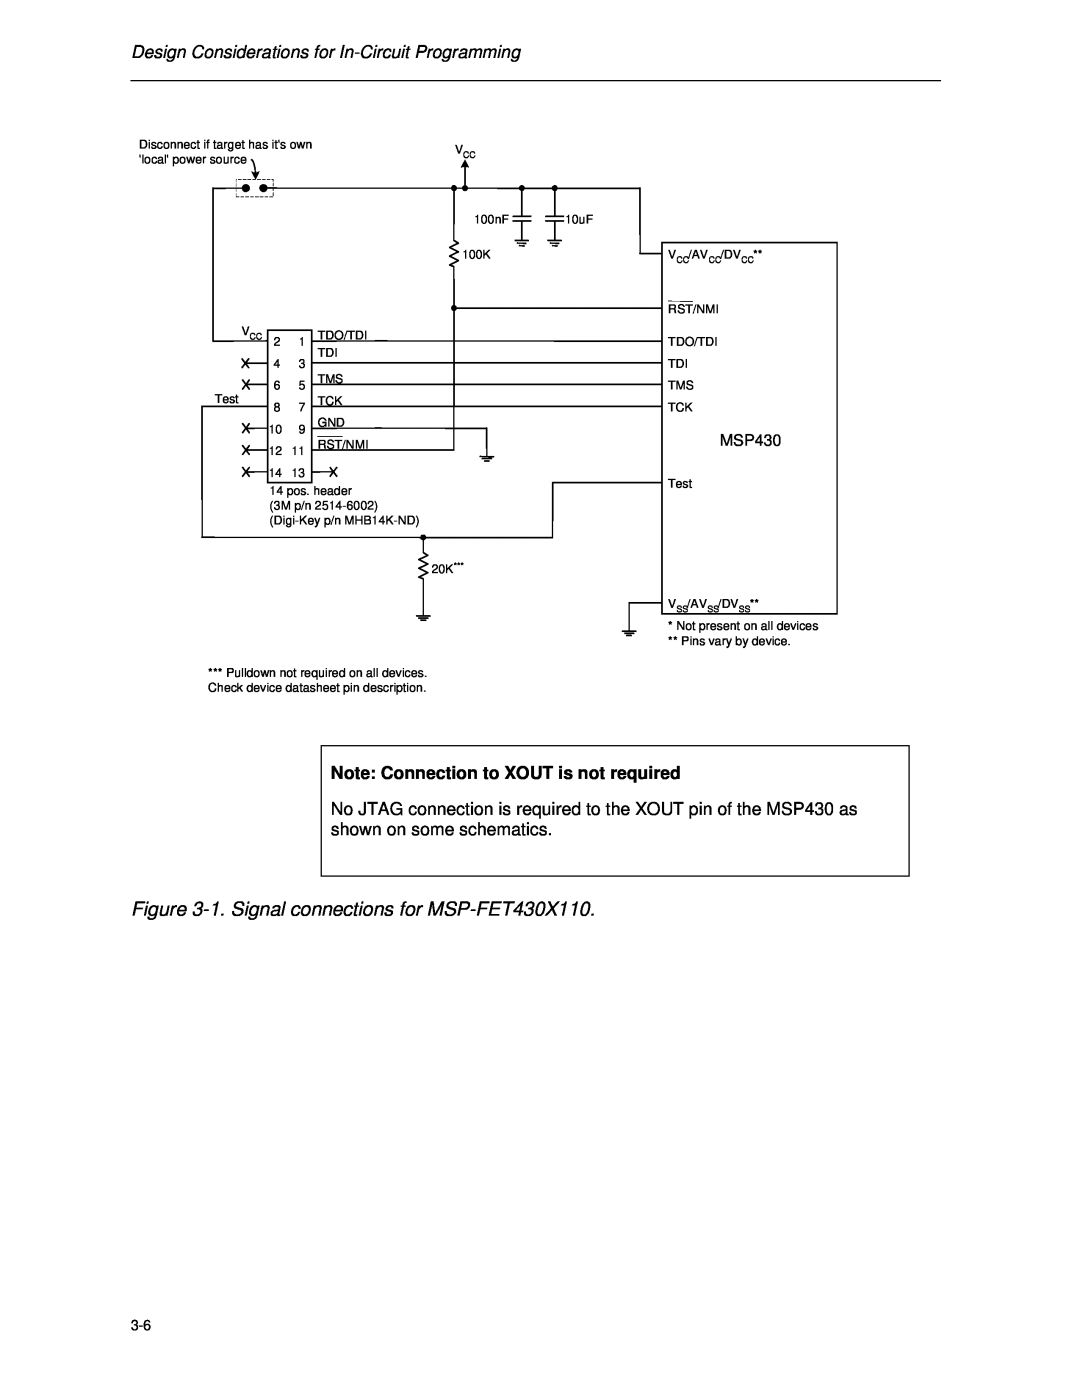 Texas Instruments manual 1. Signal connections for MSP-FET430X110, Design Considerations for In-Circuit Programming 